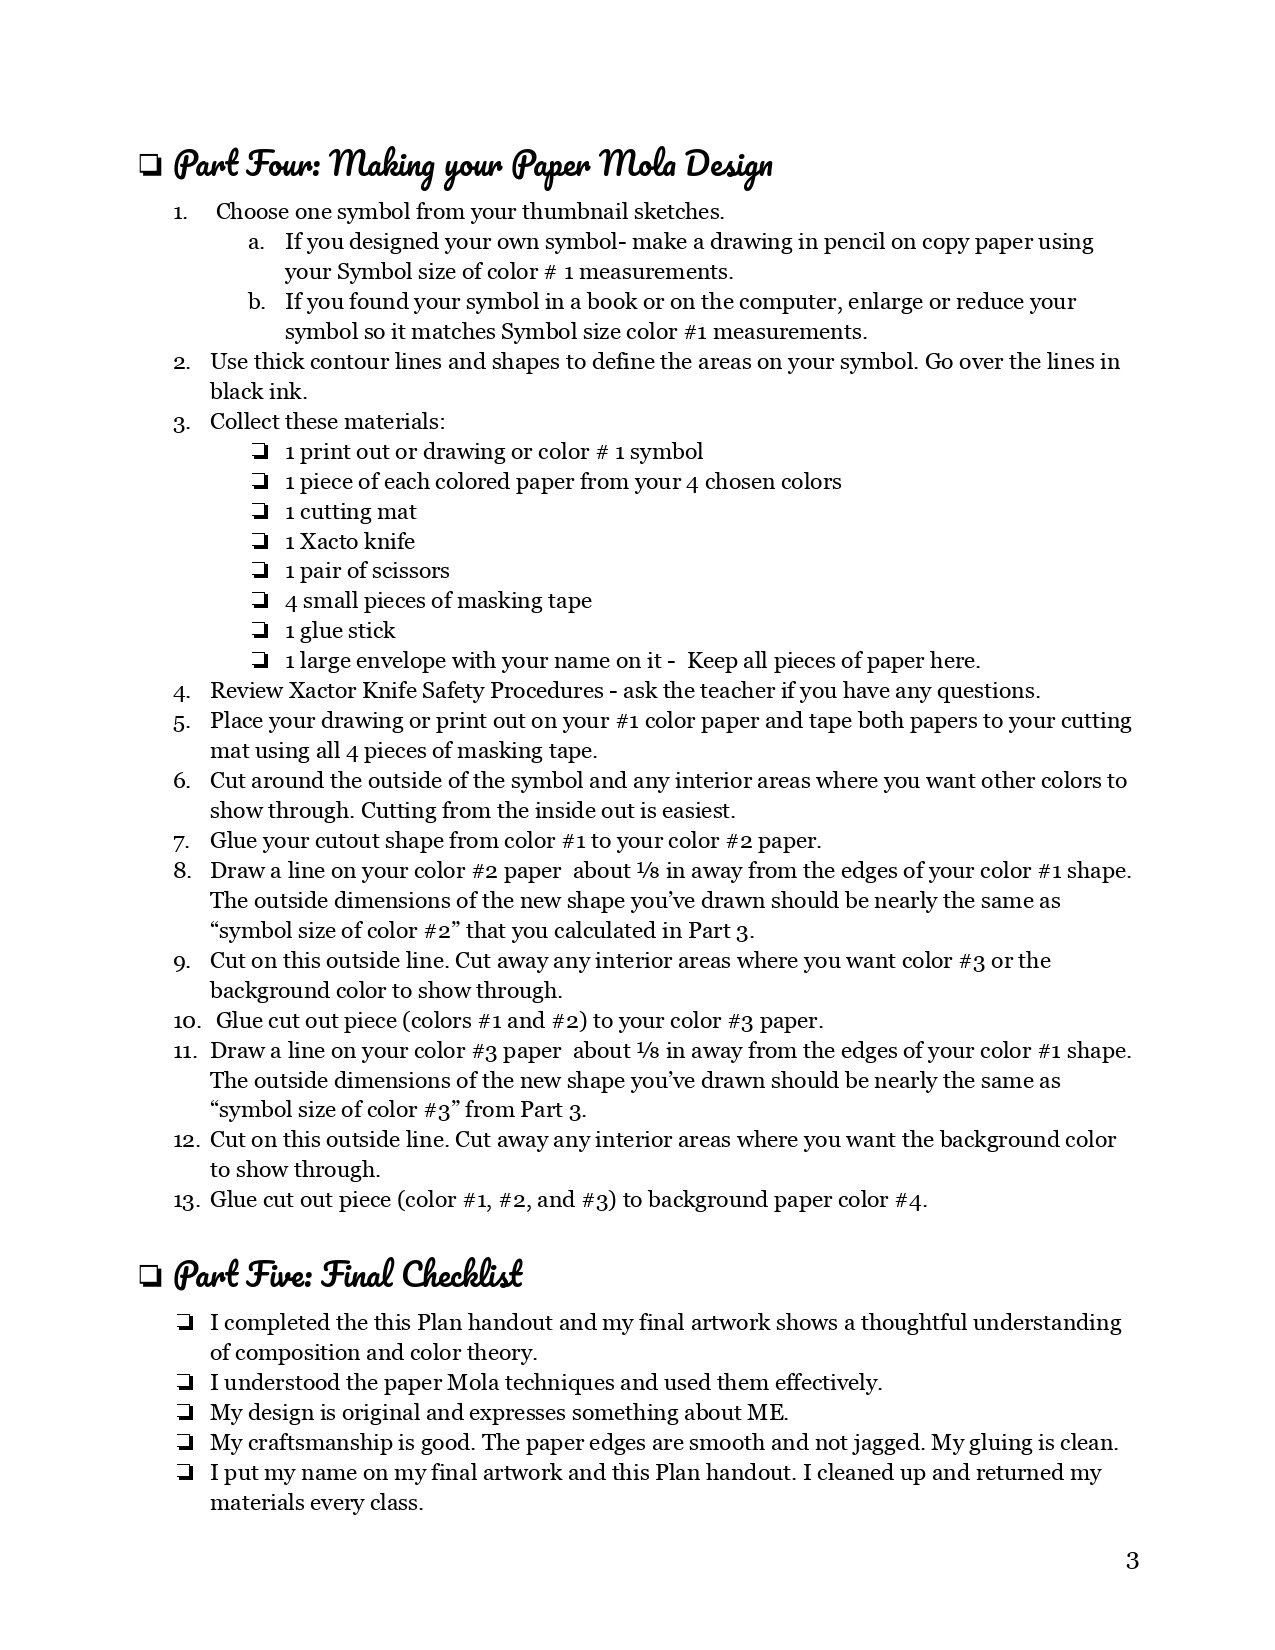 Paper Mola Handout Abby Klein_page-0003.jpg